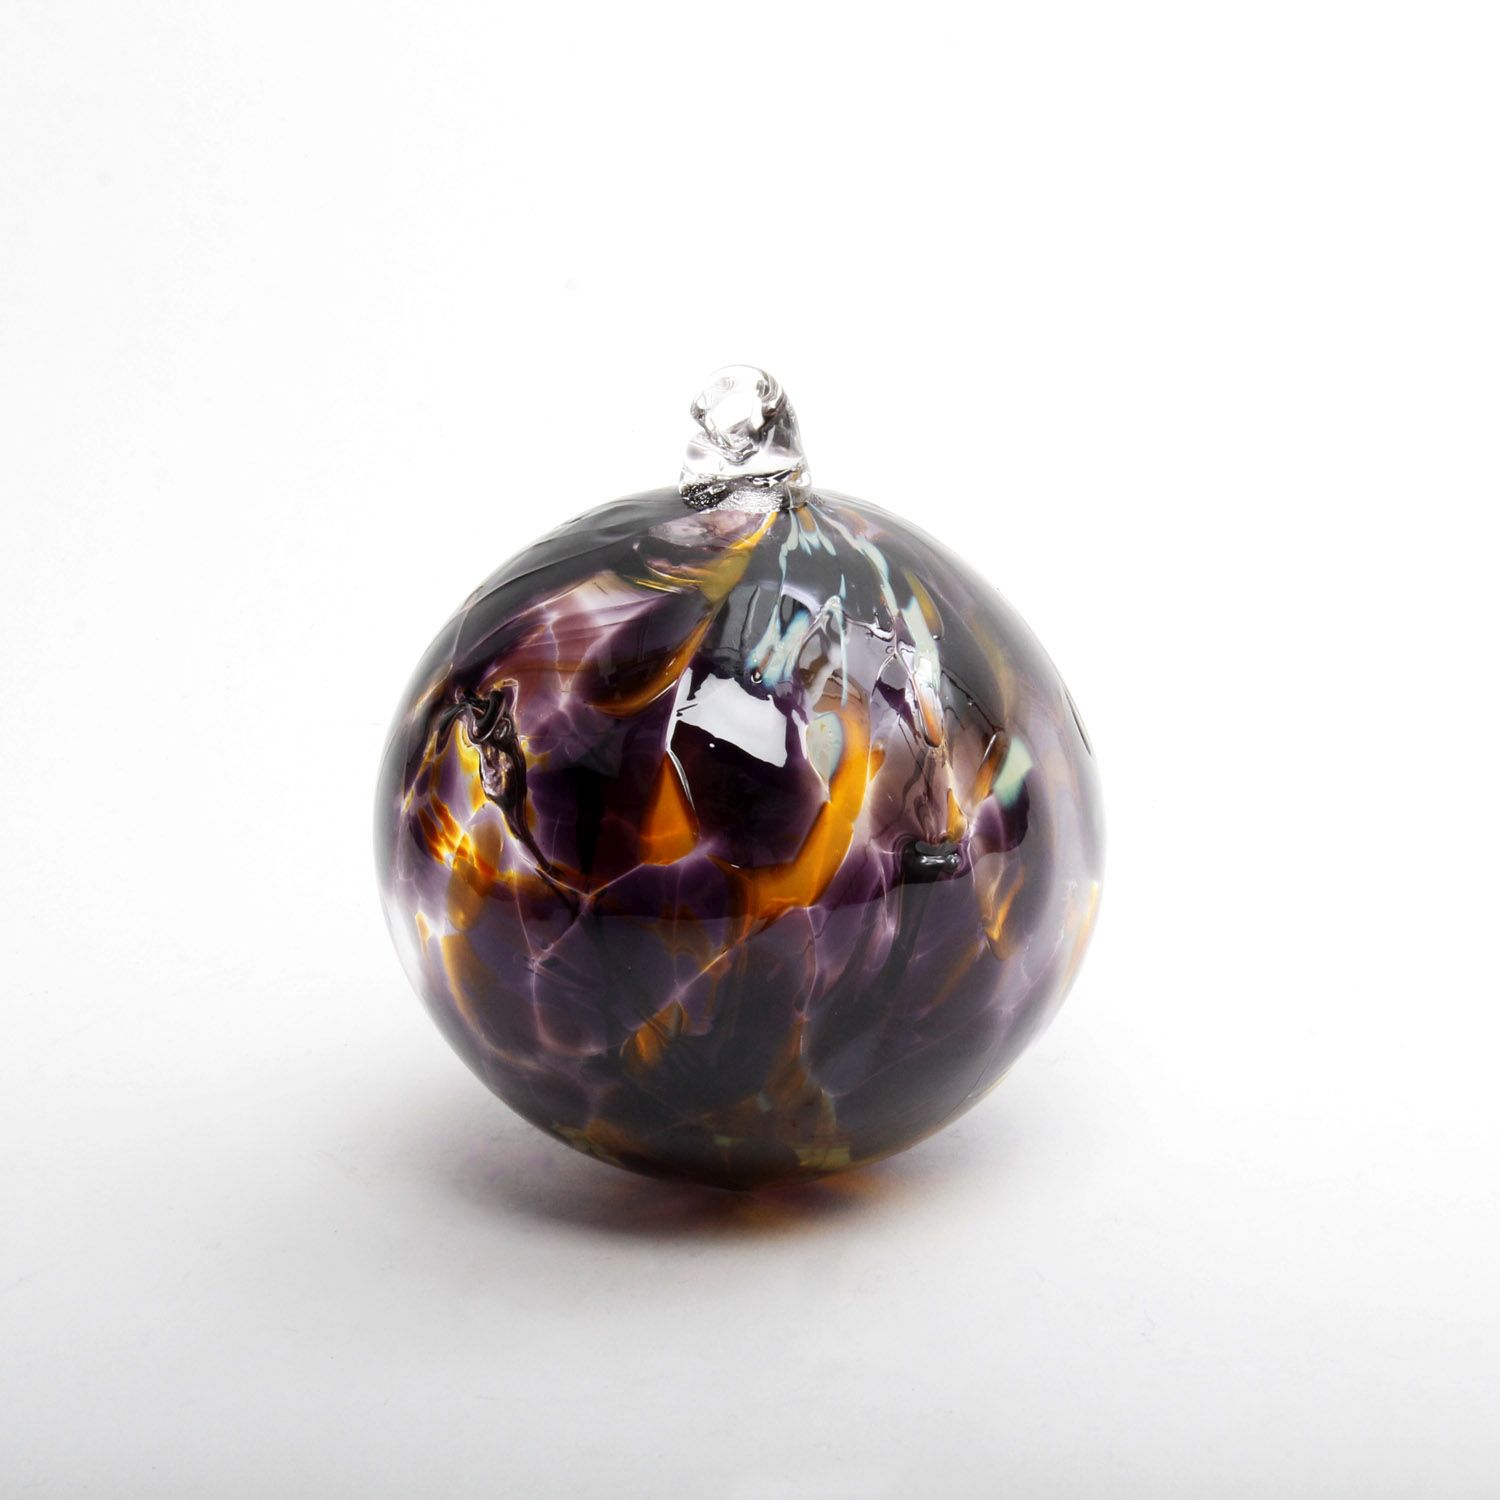 Gordon Boyd: Small Witchball – Elderberry Product Image 1 of 3